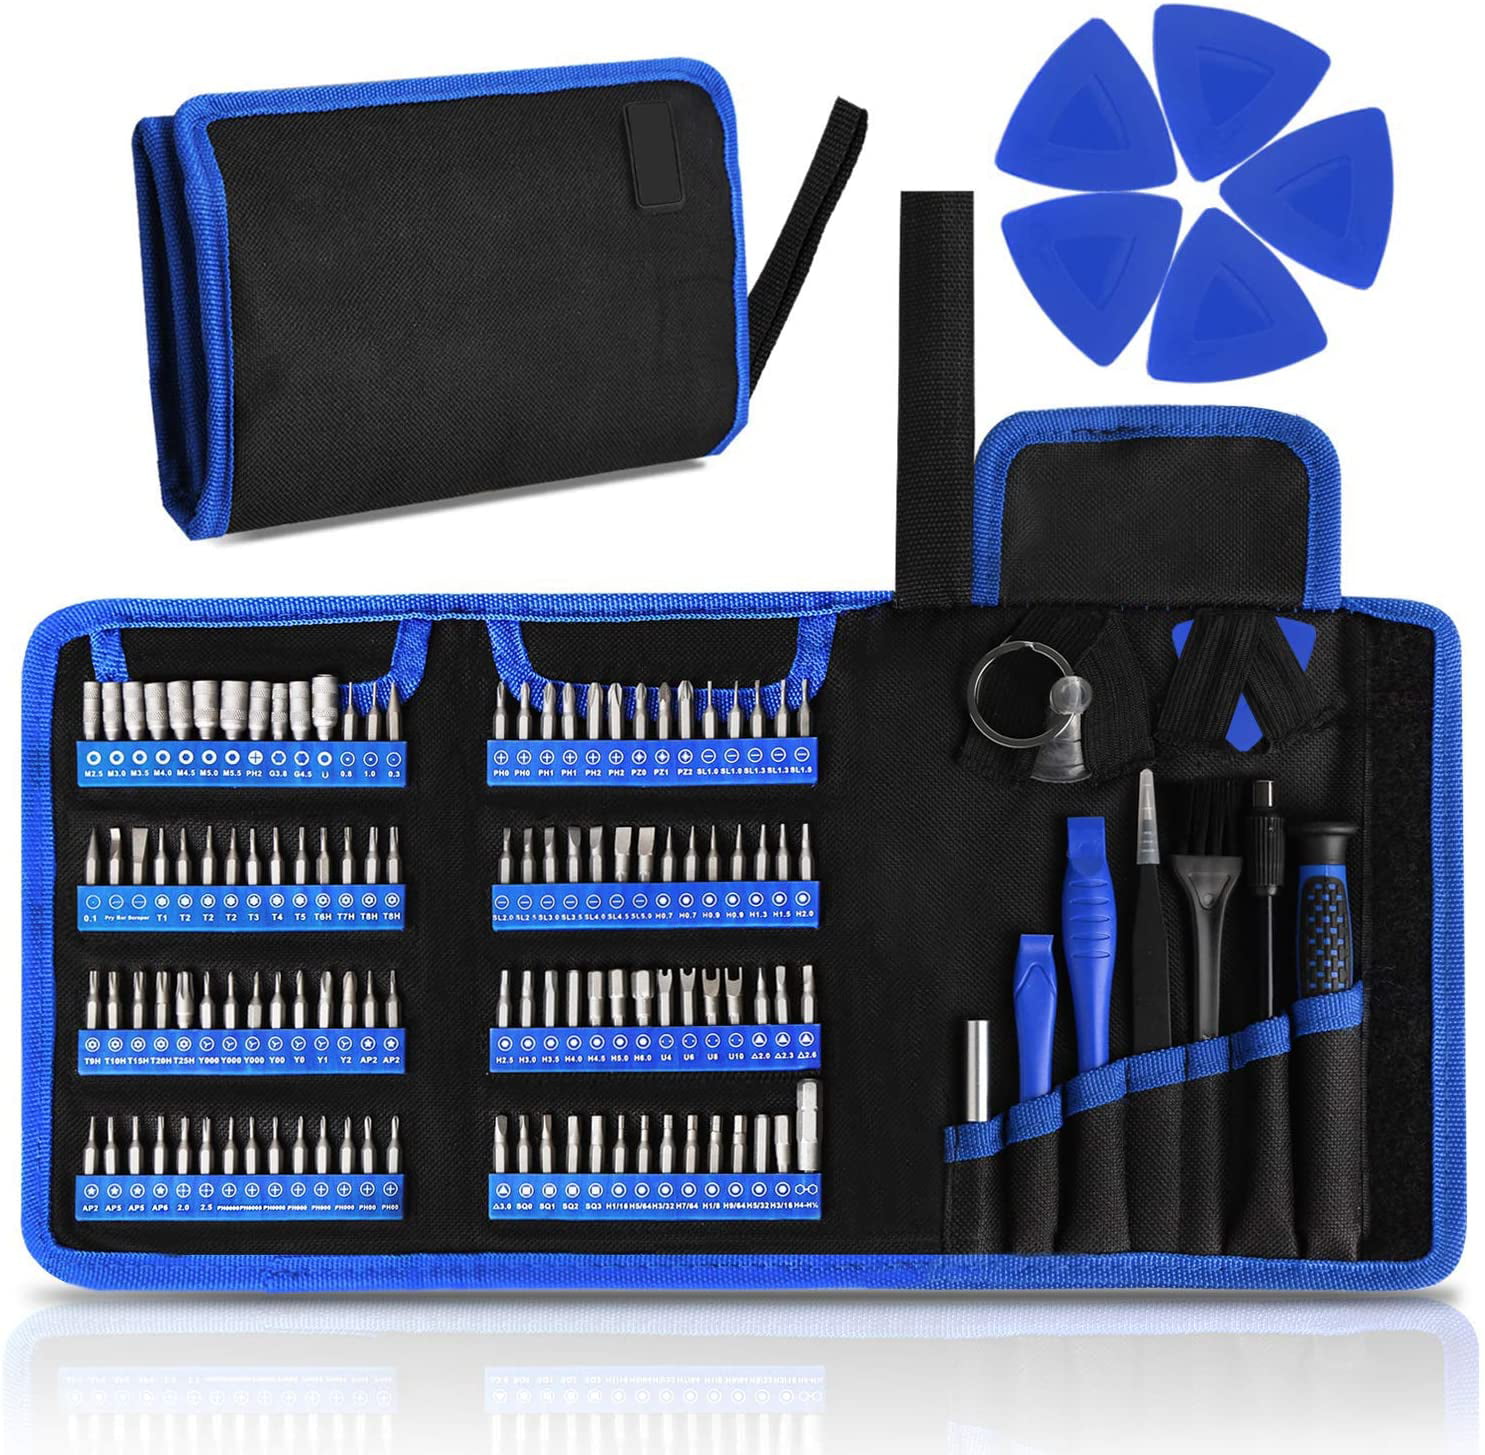 Professional Repair Tool Kit for Mobile Phones Smartphones Laptop Electronic Devices 126-in-1 Magnetic Screwdriver Set with 112 Bits ORIA Precision Screwdriver Set Magnetic Driver Kit Blue Black 